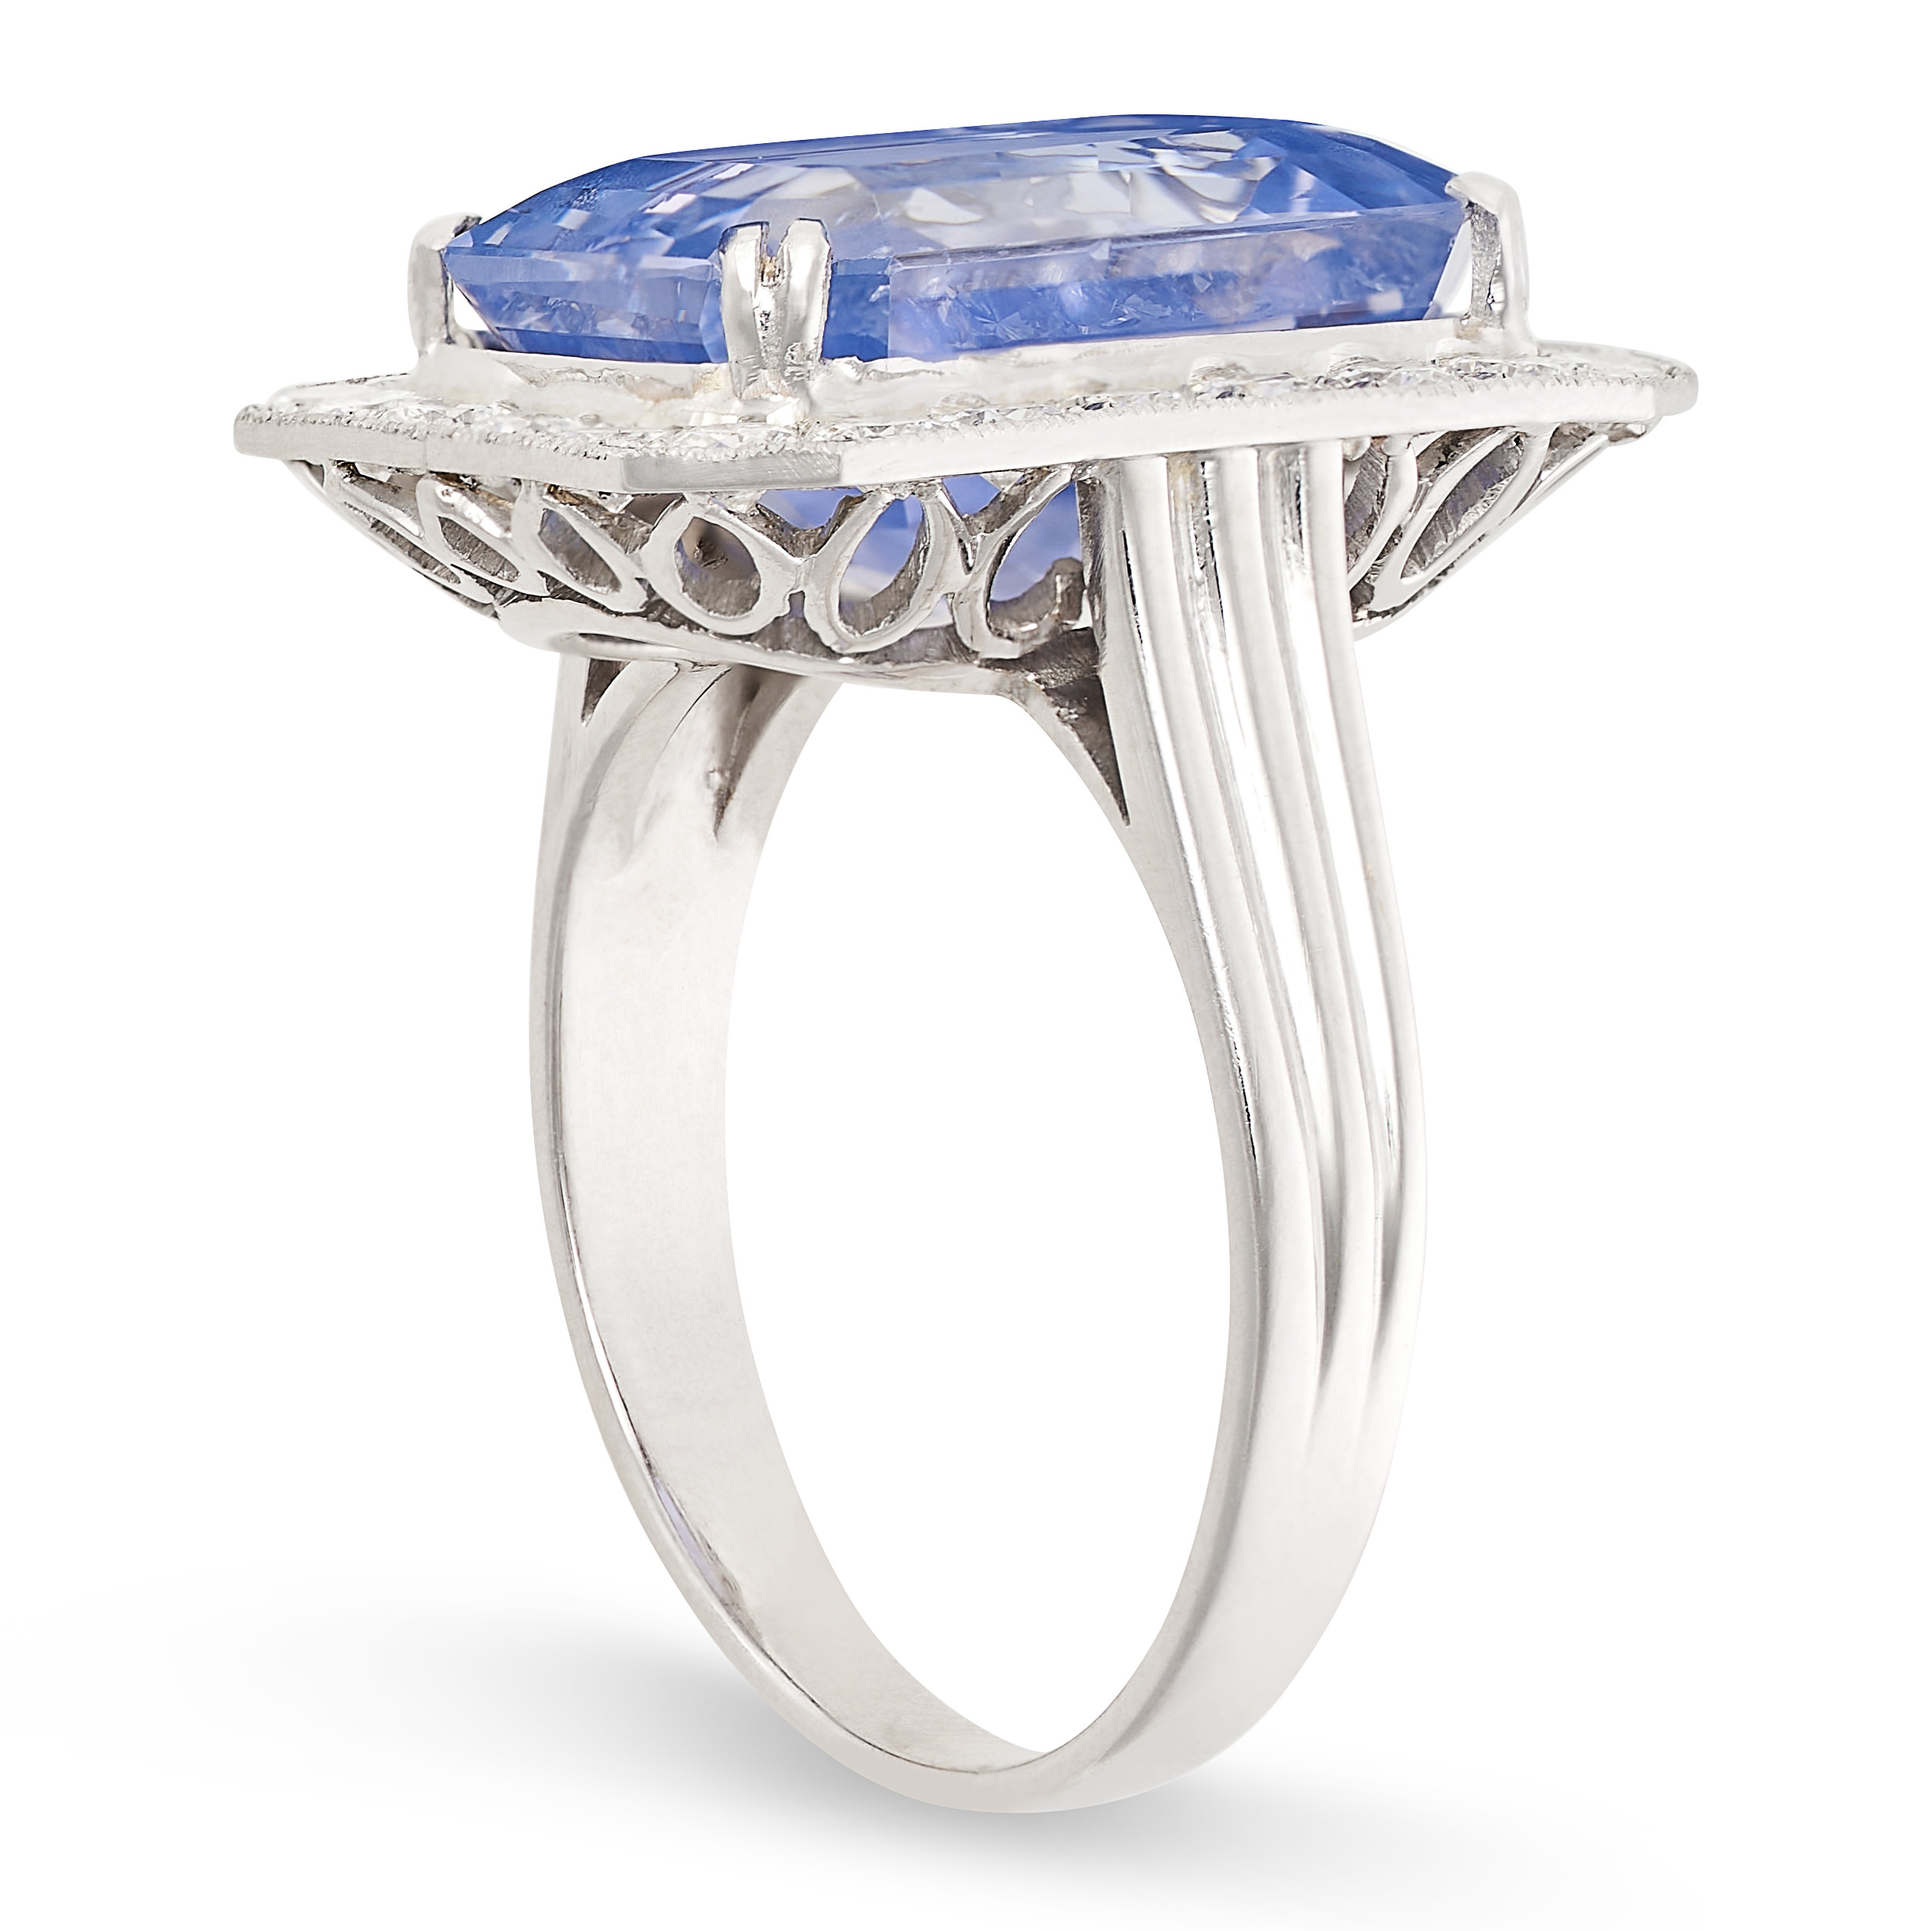 A CEYLON NO HEAT SAPPHIRE AND DIAMOND RING set with an emerald cut blue sapphire of 13.49 carats - Image 2 of 2